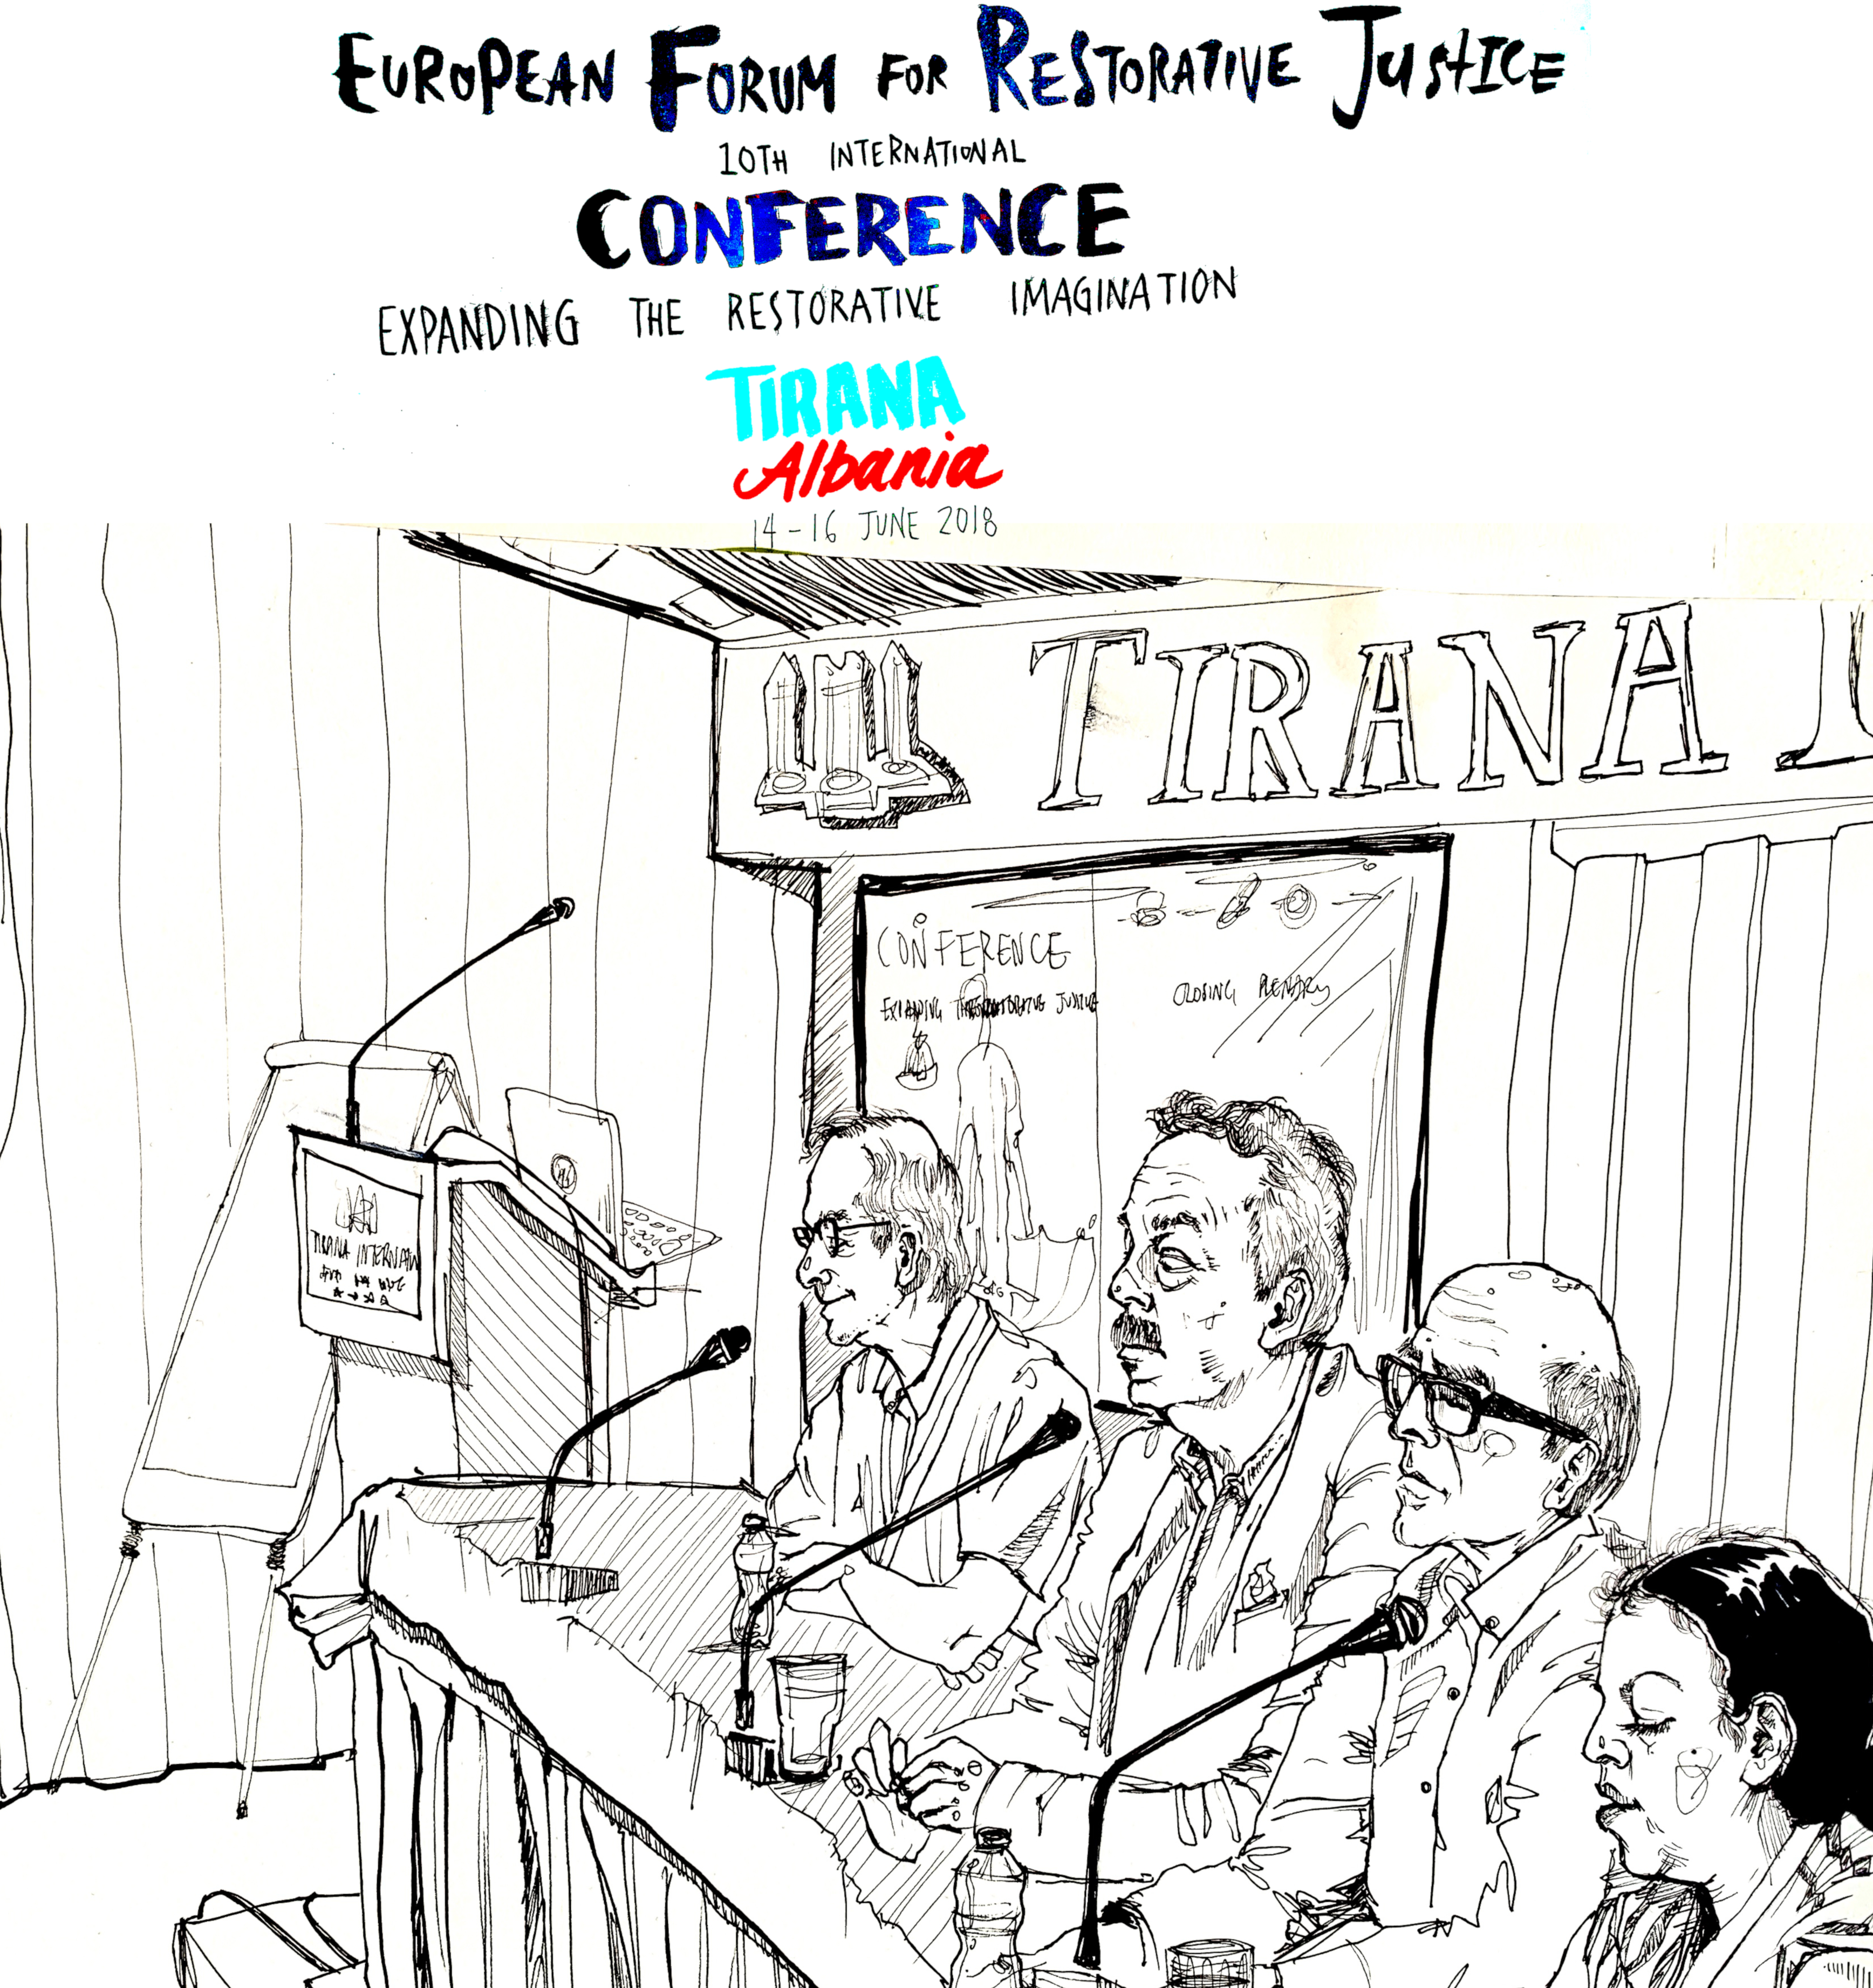 Sketch of a plenary discussion by Lee Anderson